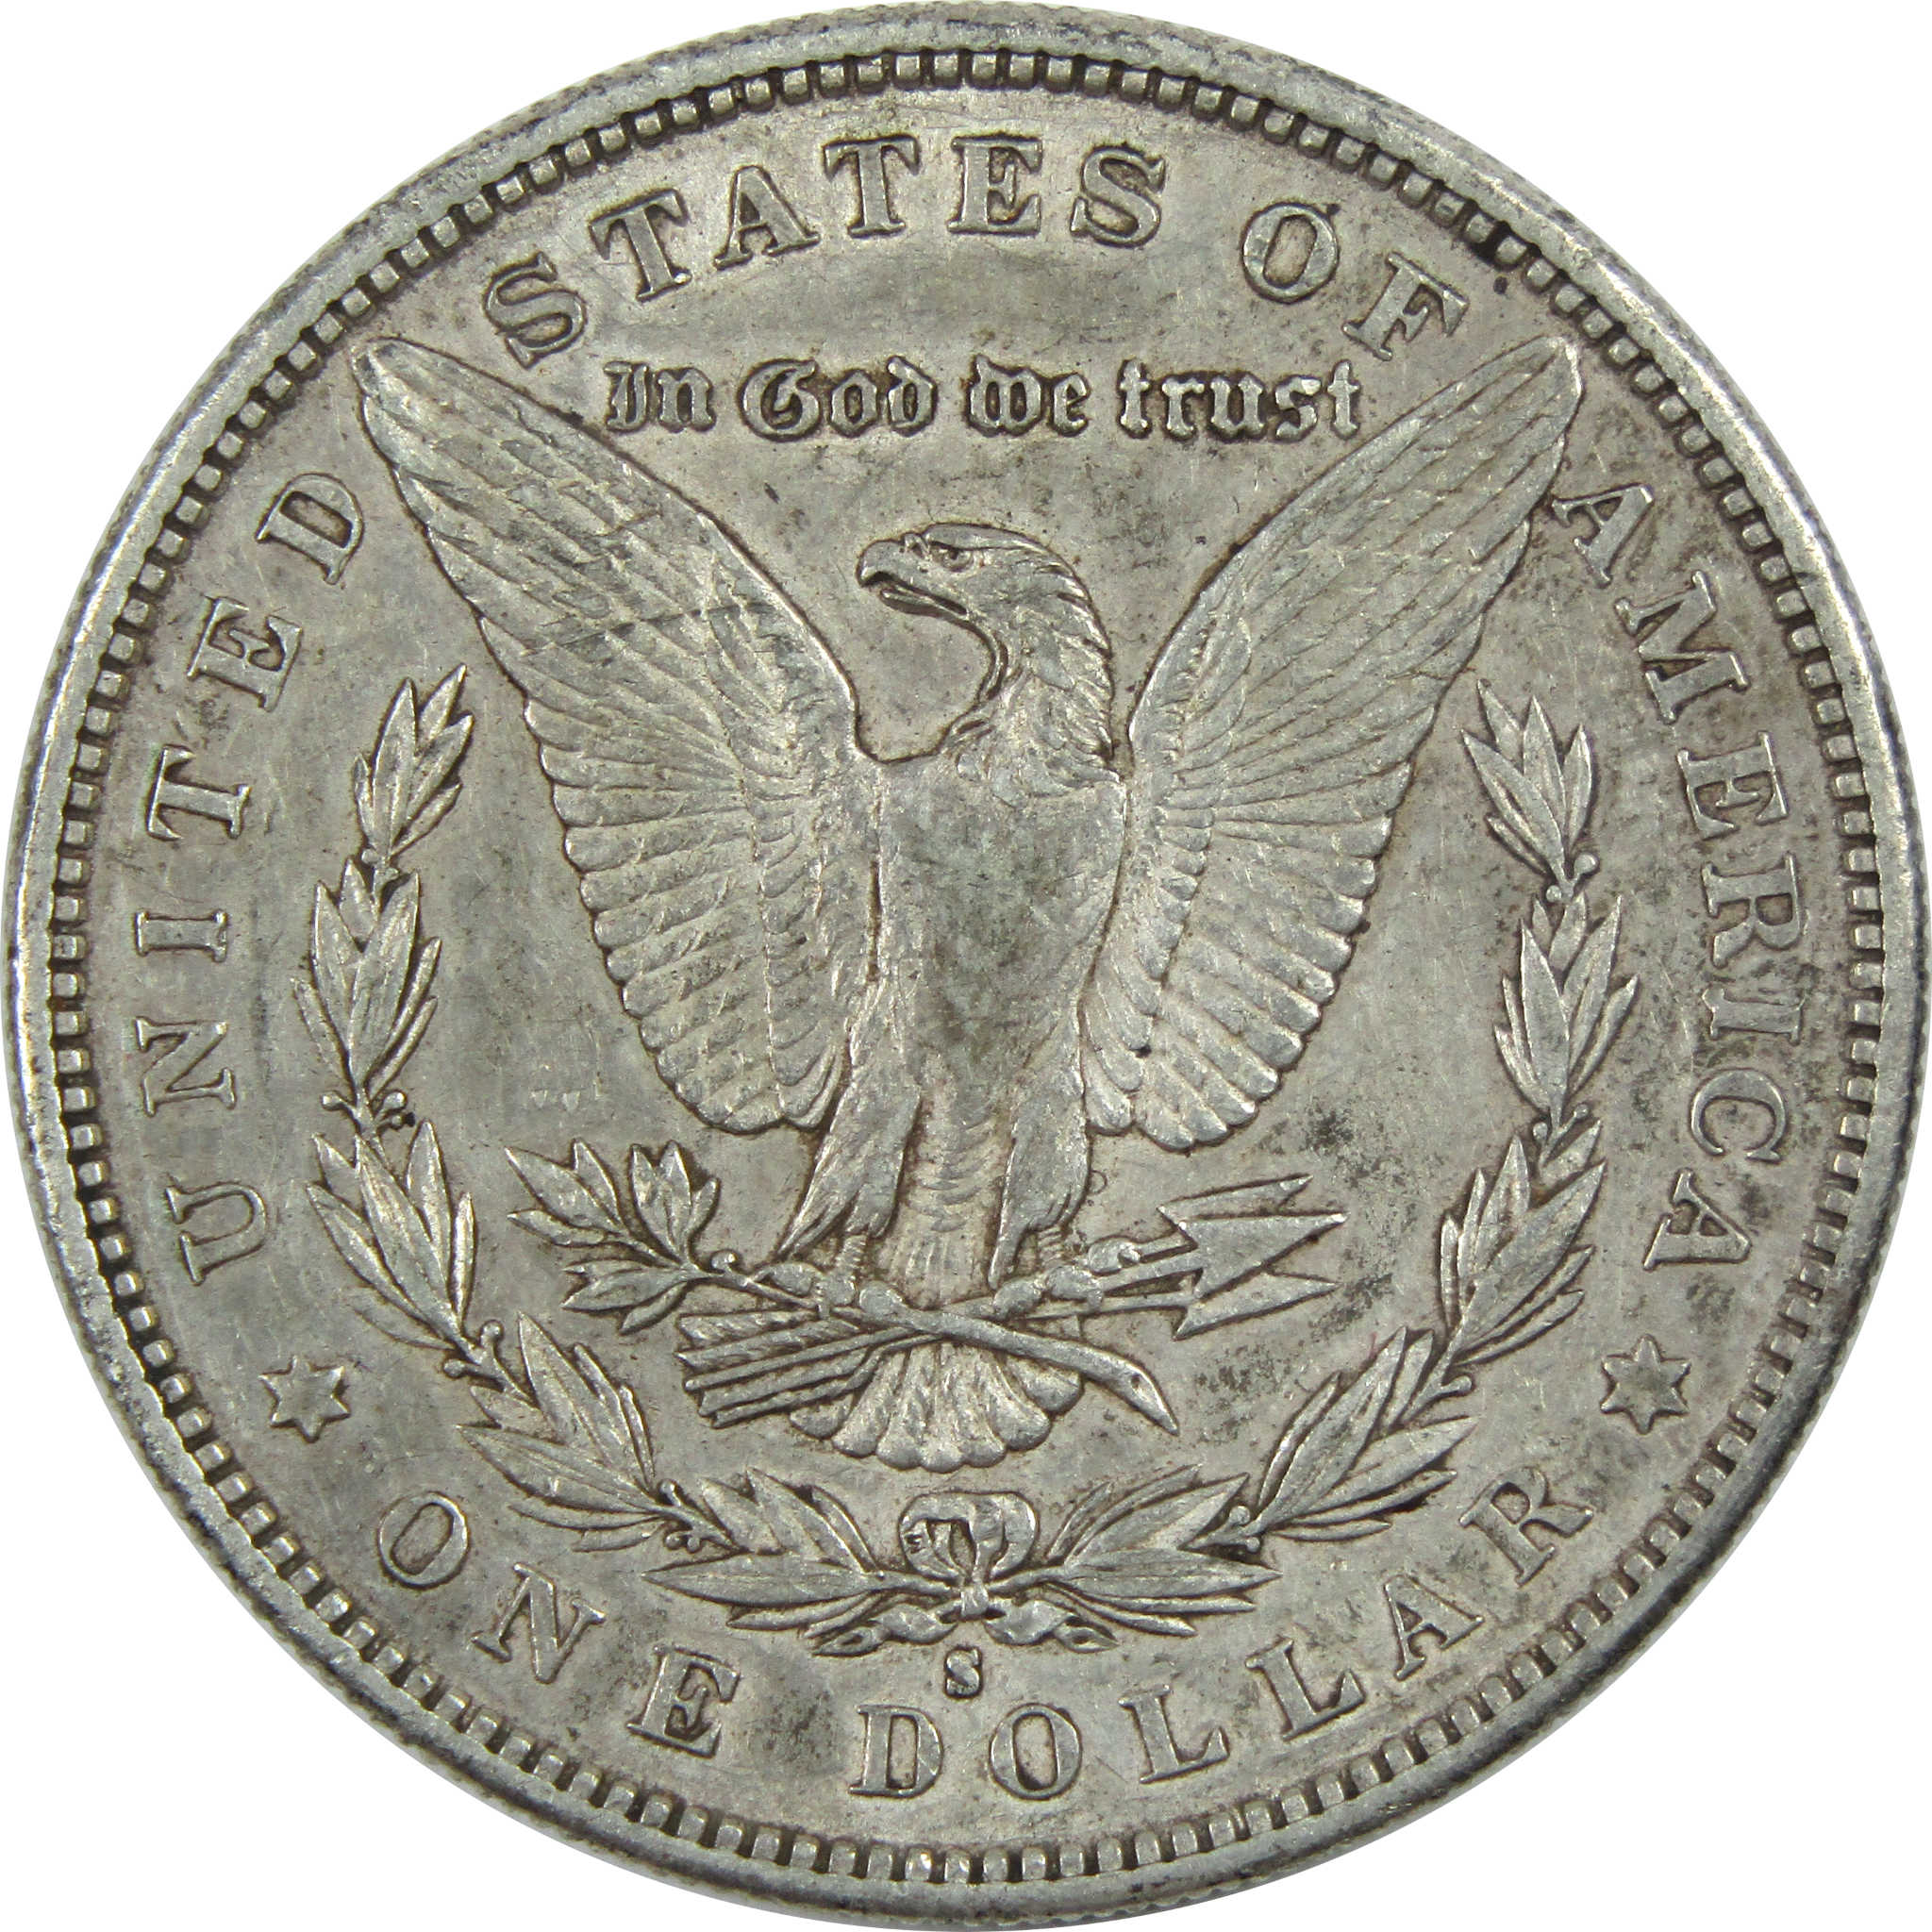 1885 S Morgan Dollar XF EF Extremely Fine Silver $1 Coin SKU:I11672 - Morgan coin - Morgan silver dollar - Morgan silver dollar for sale - Profile Coins &amp; Collectibles